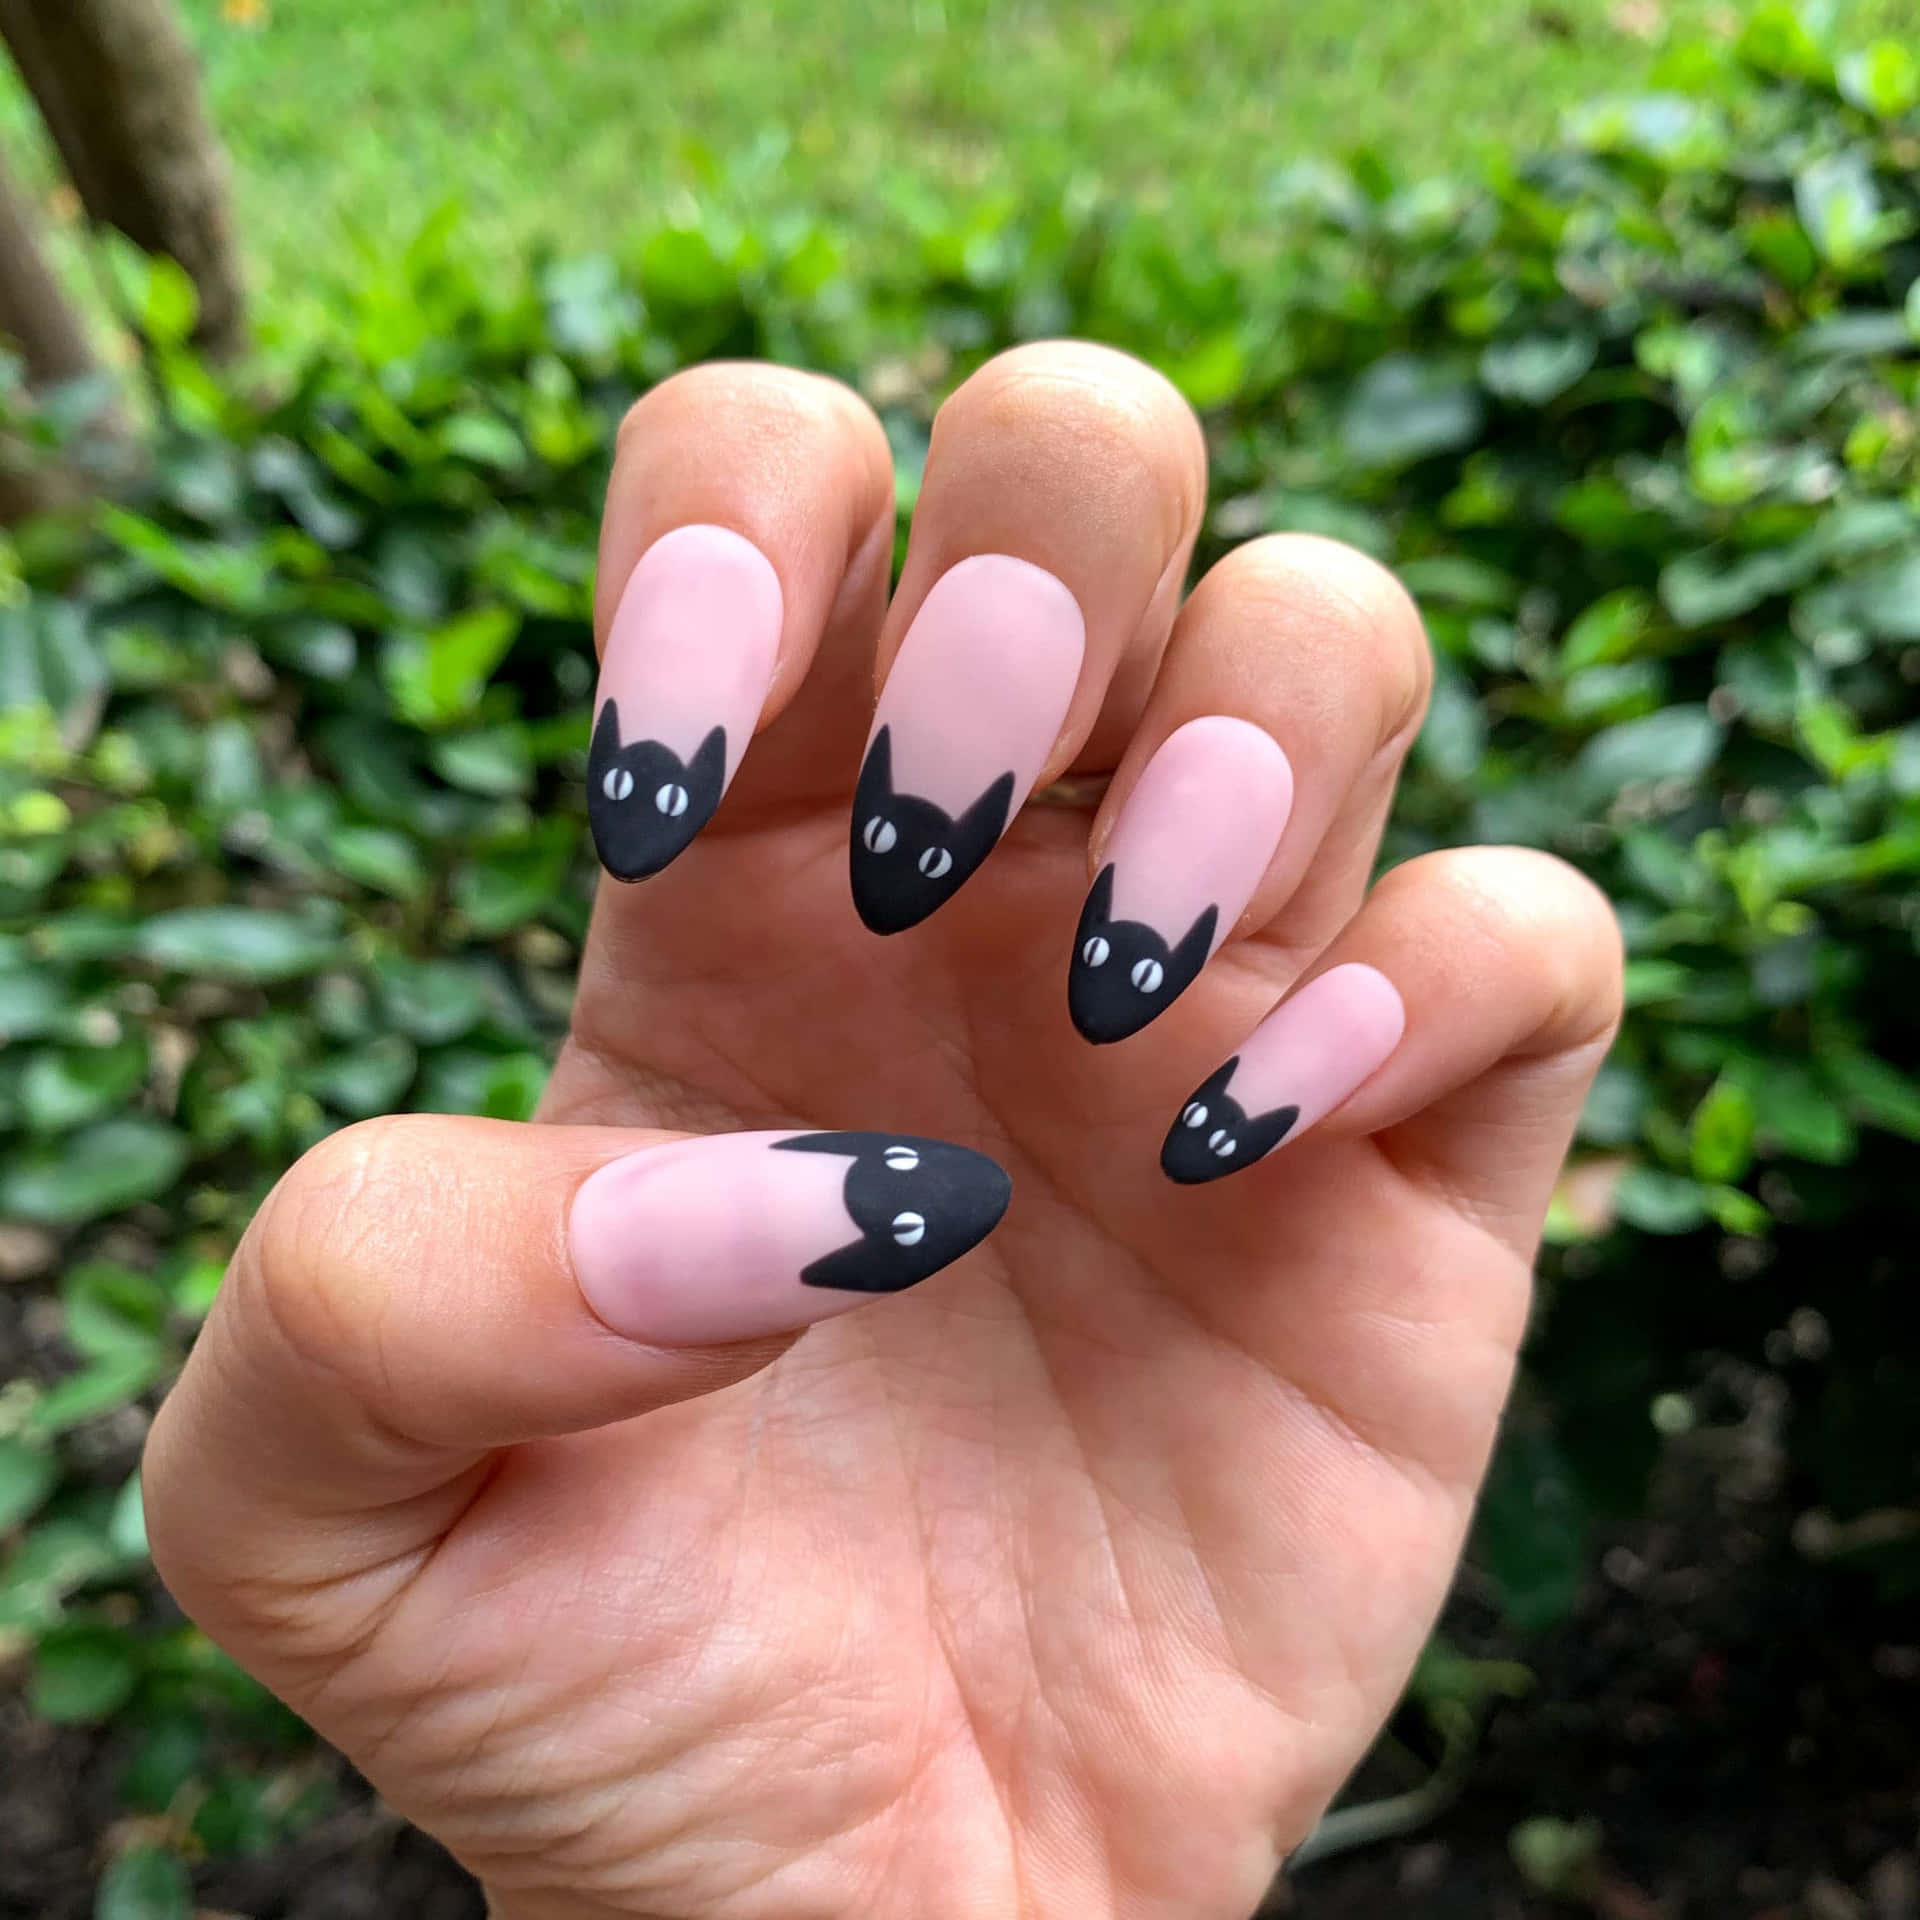 Enjoy A Scary Halloween With Spooky Nail Art Wallpaper